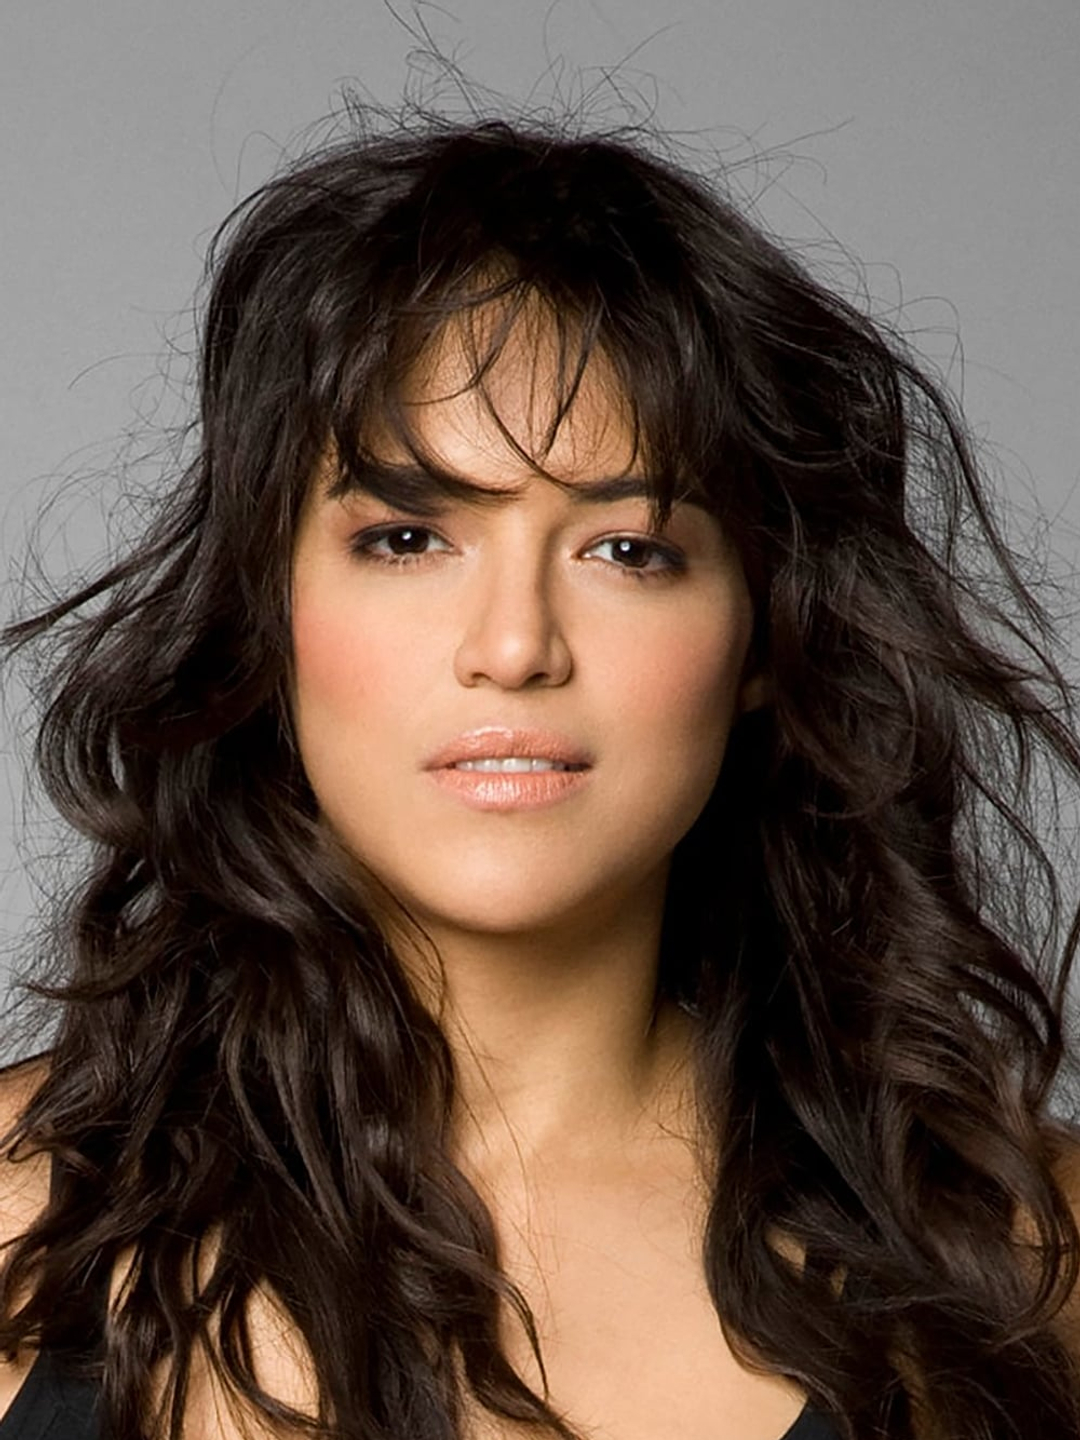 Michelle Rodriguez who is her mother